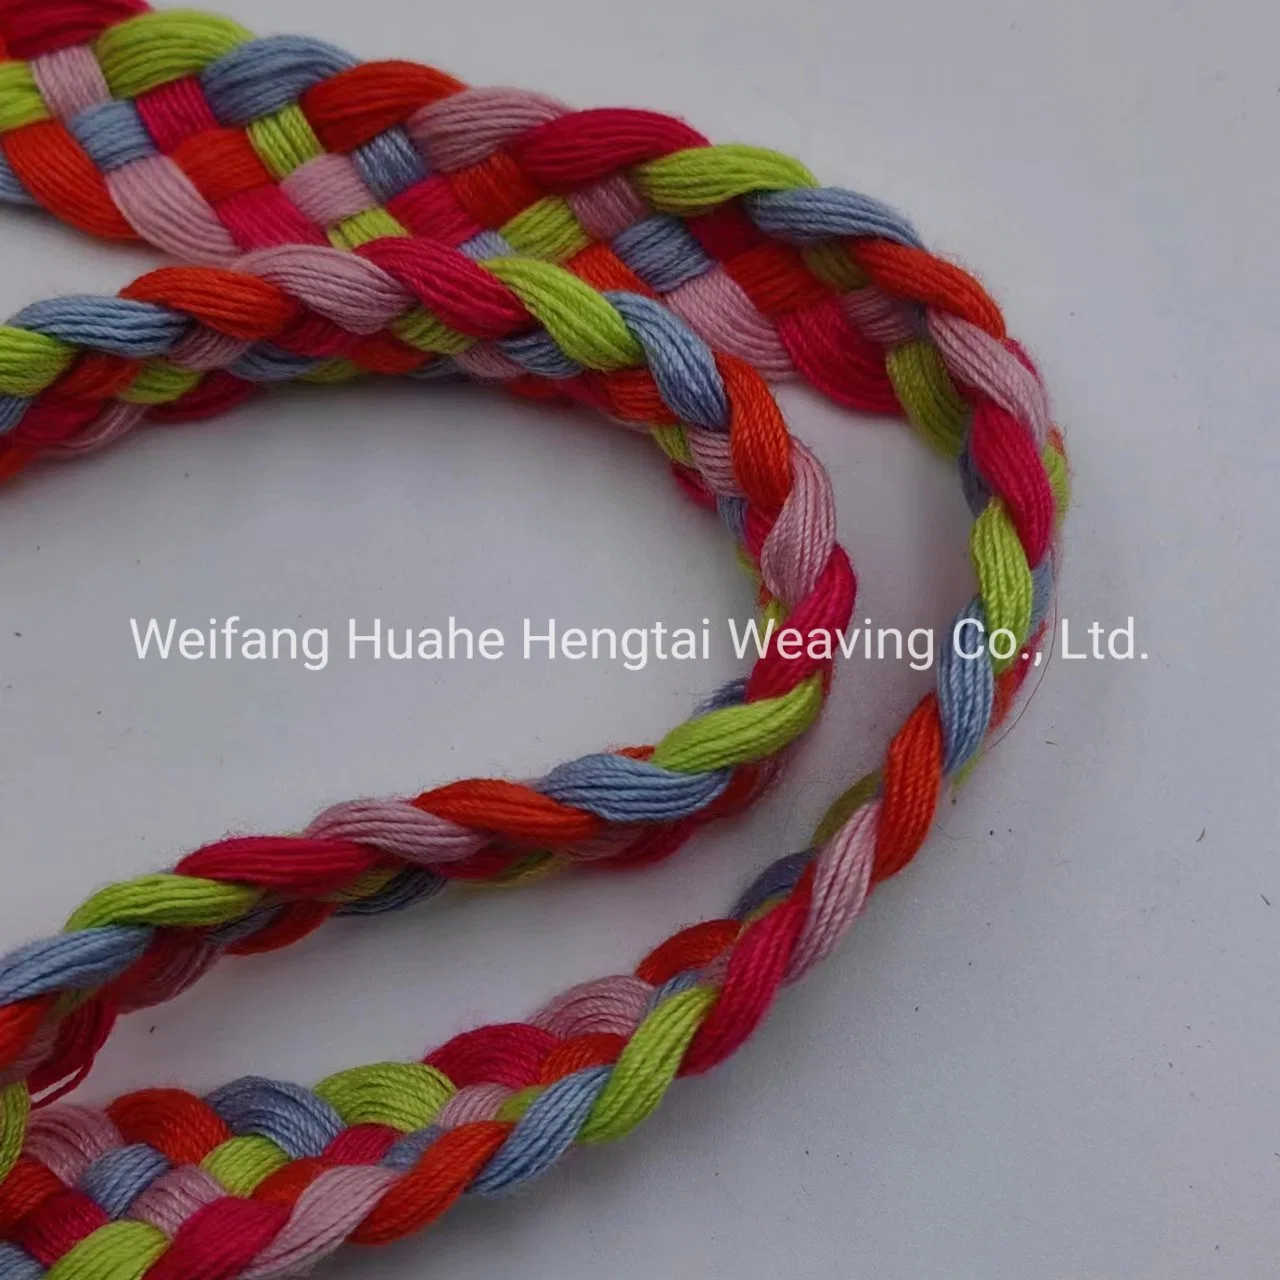 Wholesale of High-Quality Colored Woven Rope in Stock